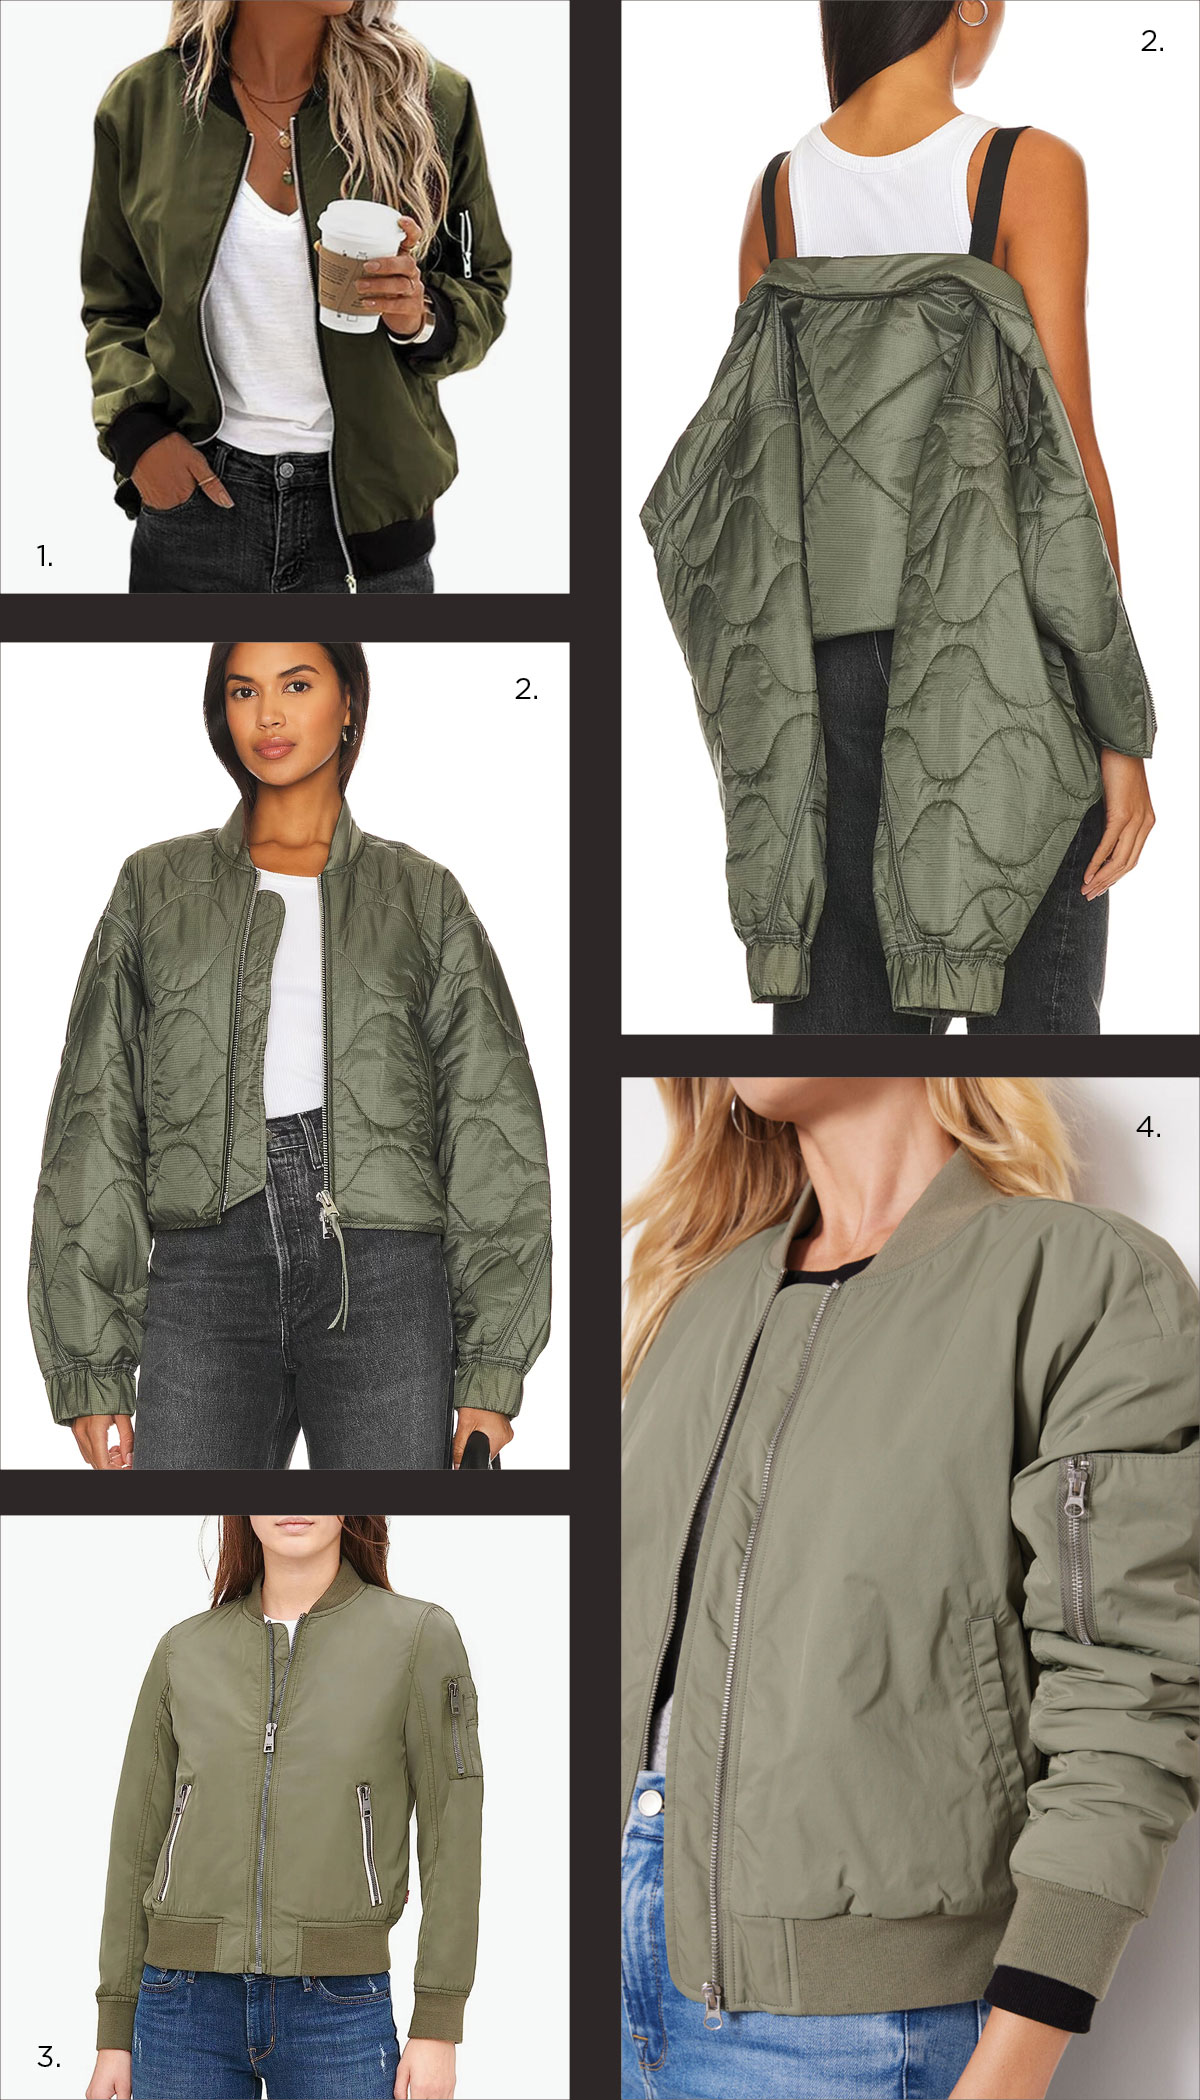 Fall Fashion Trends 2023 - The olive green quilted army jacket is trending for fall.